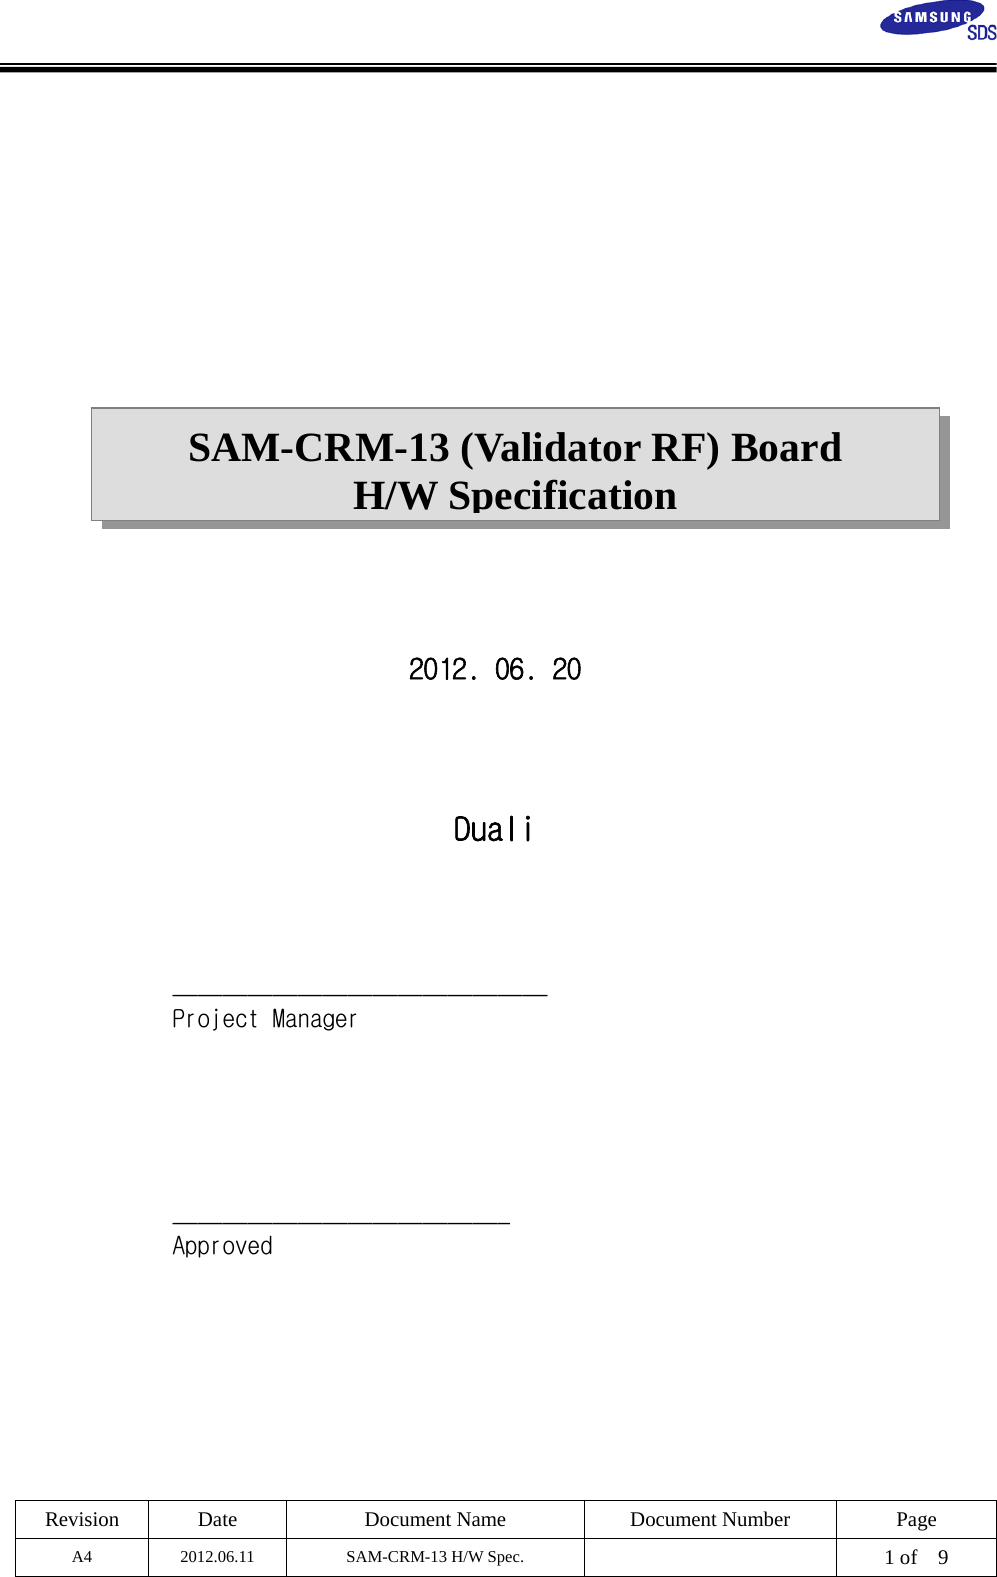  Revision  Date  Document Name  Document Number  Page A4  2012.06.11  SAM-CRM-13 H/W Spec.    1 of    9   SAM-CRM-13 (Validator RF) Board H/W Specification                 2012. 06. 20     Duali     ______________________________   Project Manager      ___________________________ Approved   